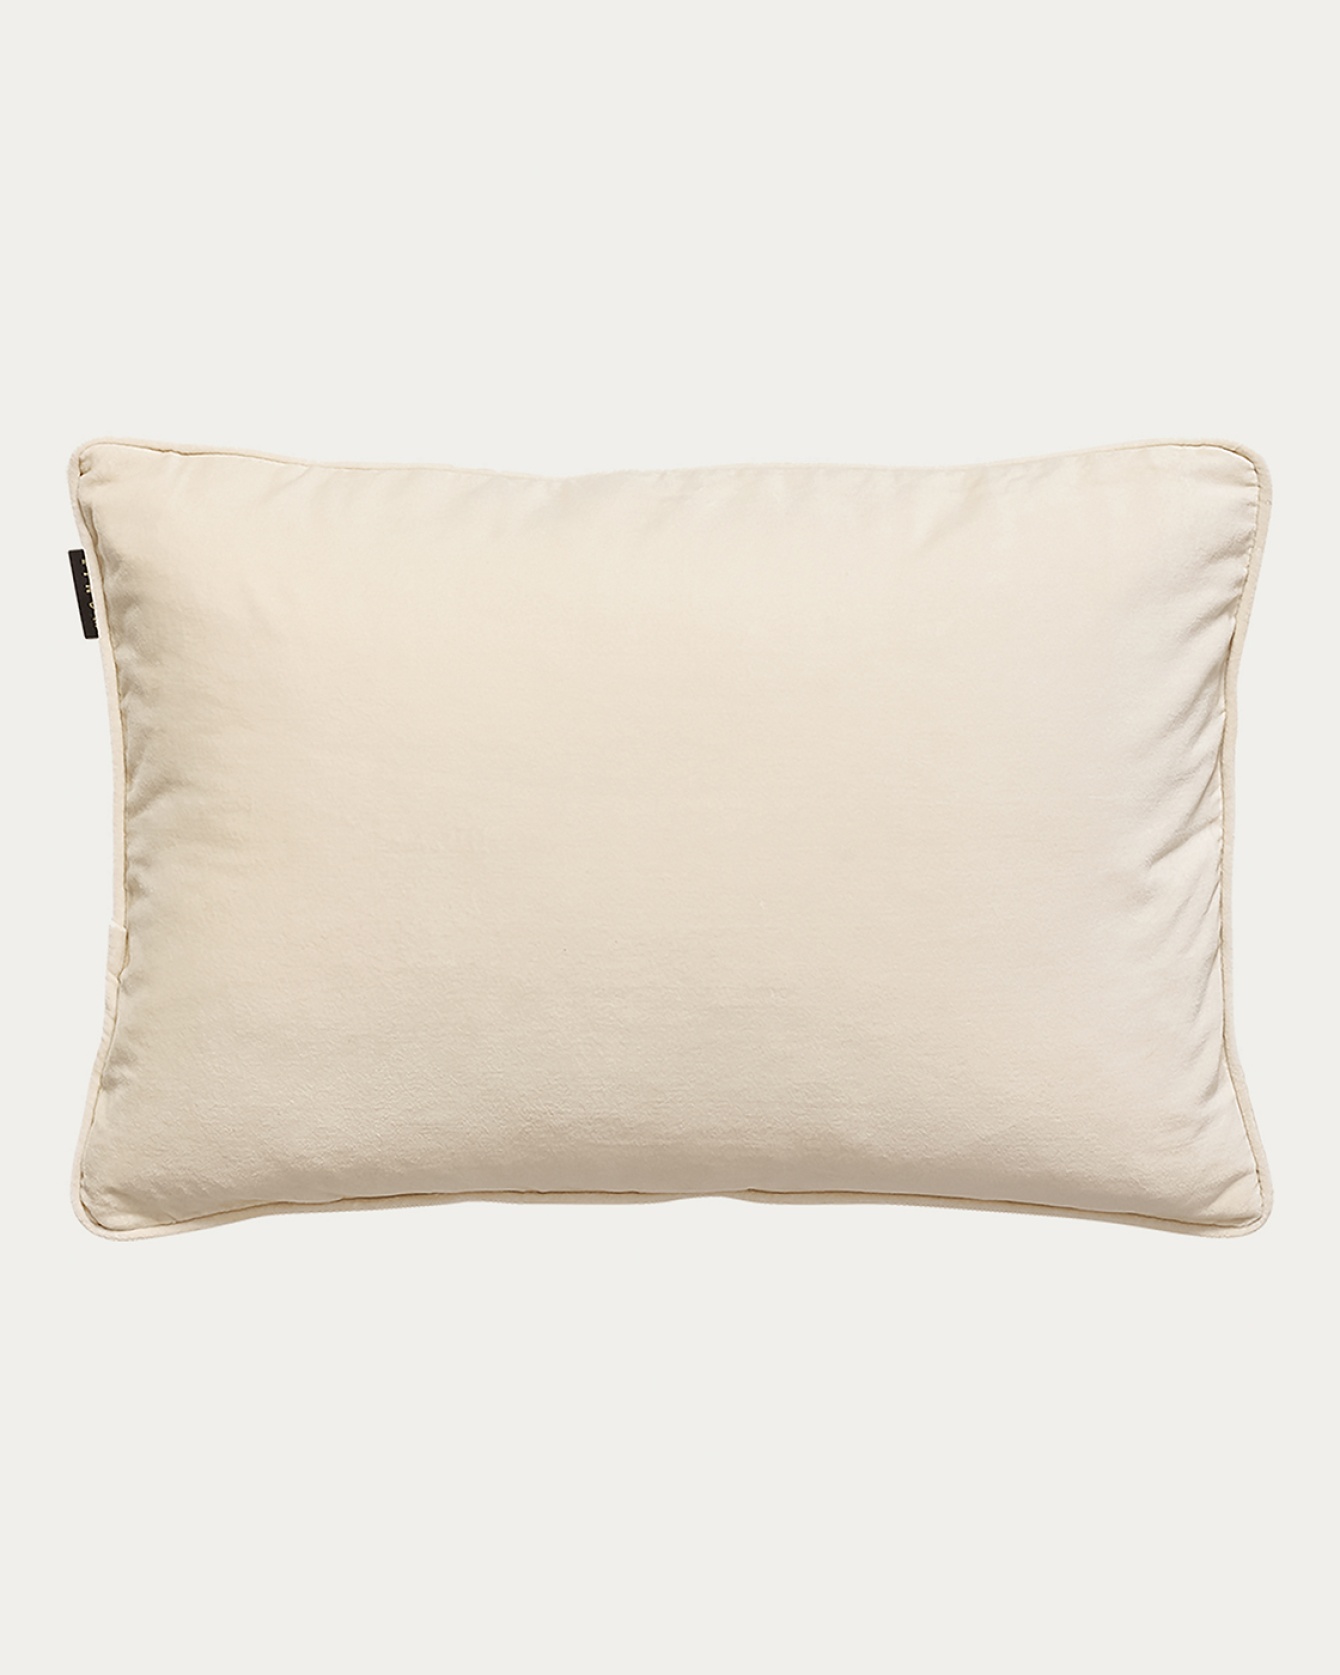 Product image creamy beige PAOLO cushion cover in soft organic cotton velvet from LINUM DESIGN. Size 40x60 cm.